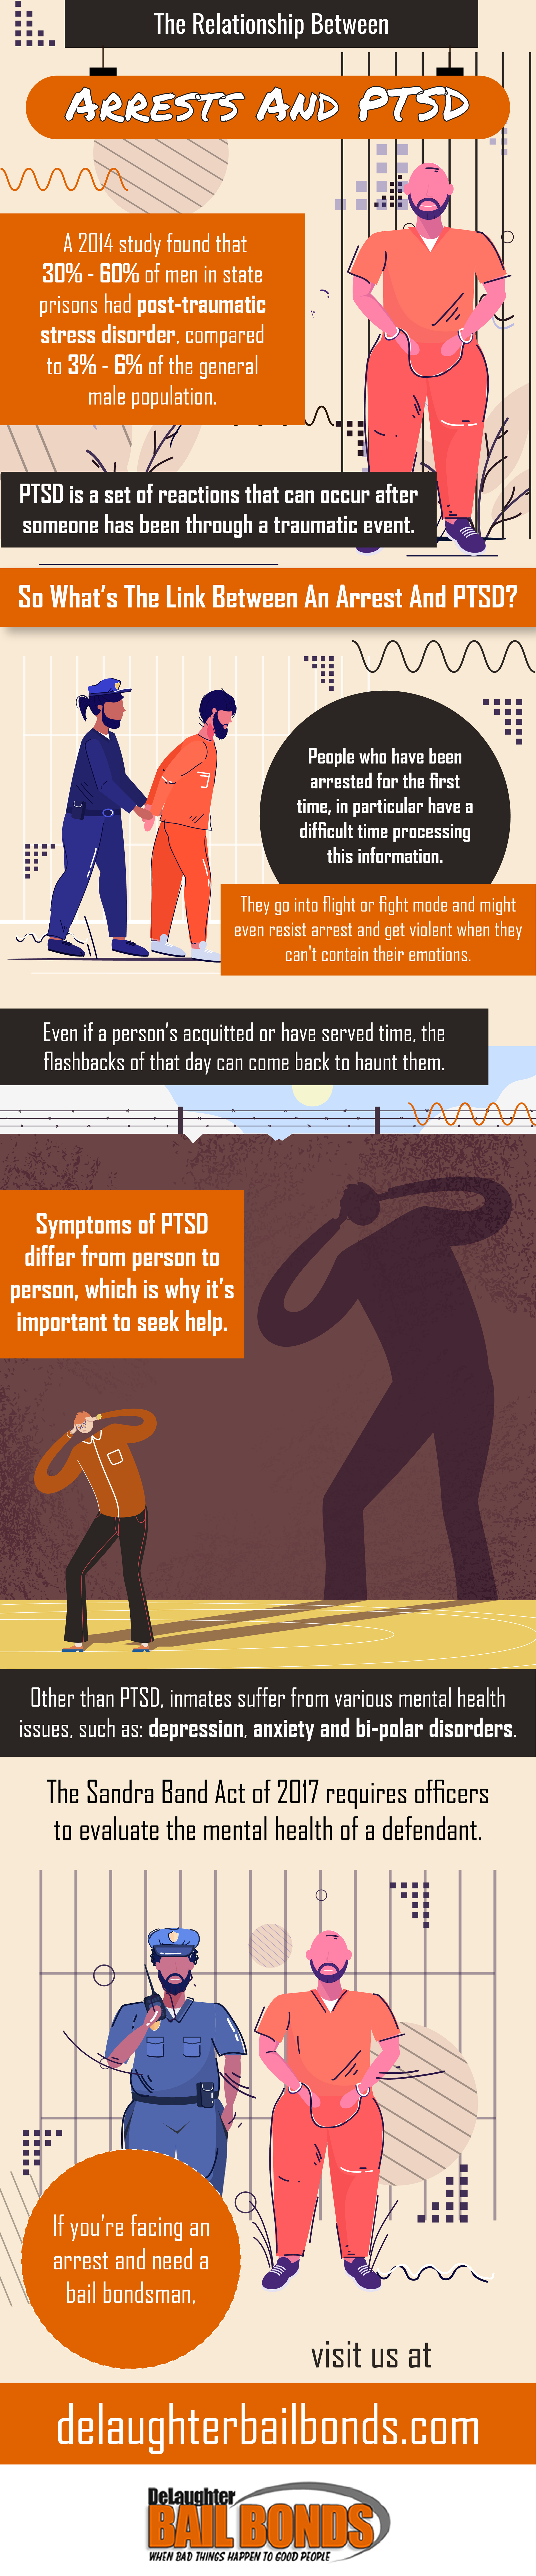 Arrests and PTSD